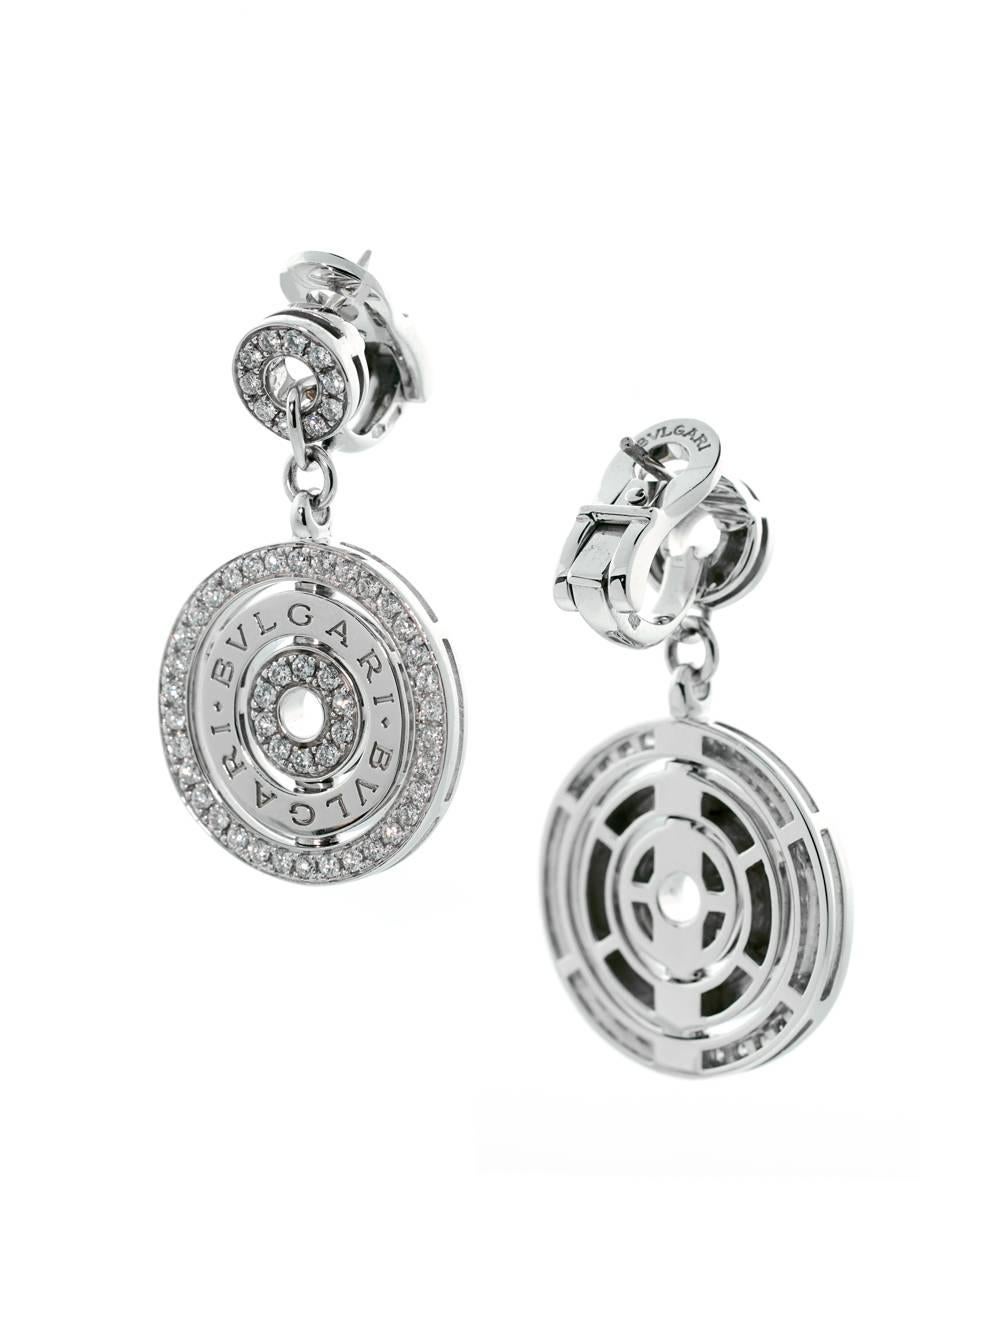 Simplicity and elegance unite to form these magnificent Bulgari 18k white gold earrings. The round pendant style design are adorned with the finest round brilliant cut diamonds.

Dimensions: 1.37 Inches in lenth

Inventory ID: 0000158
